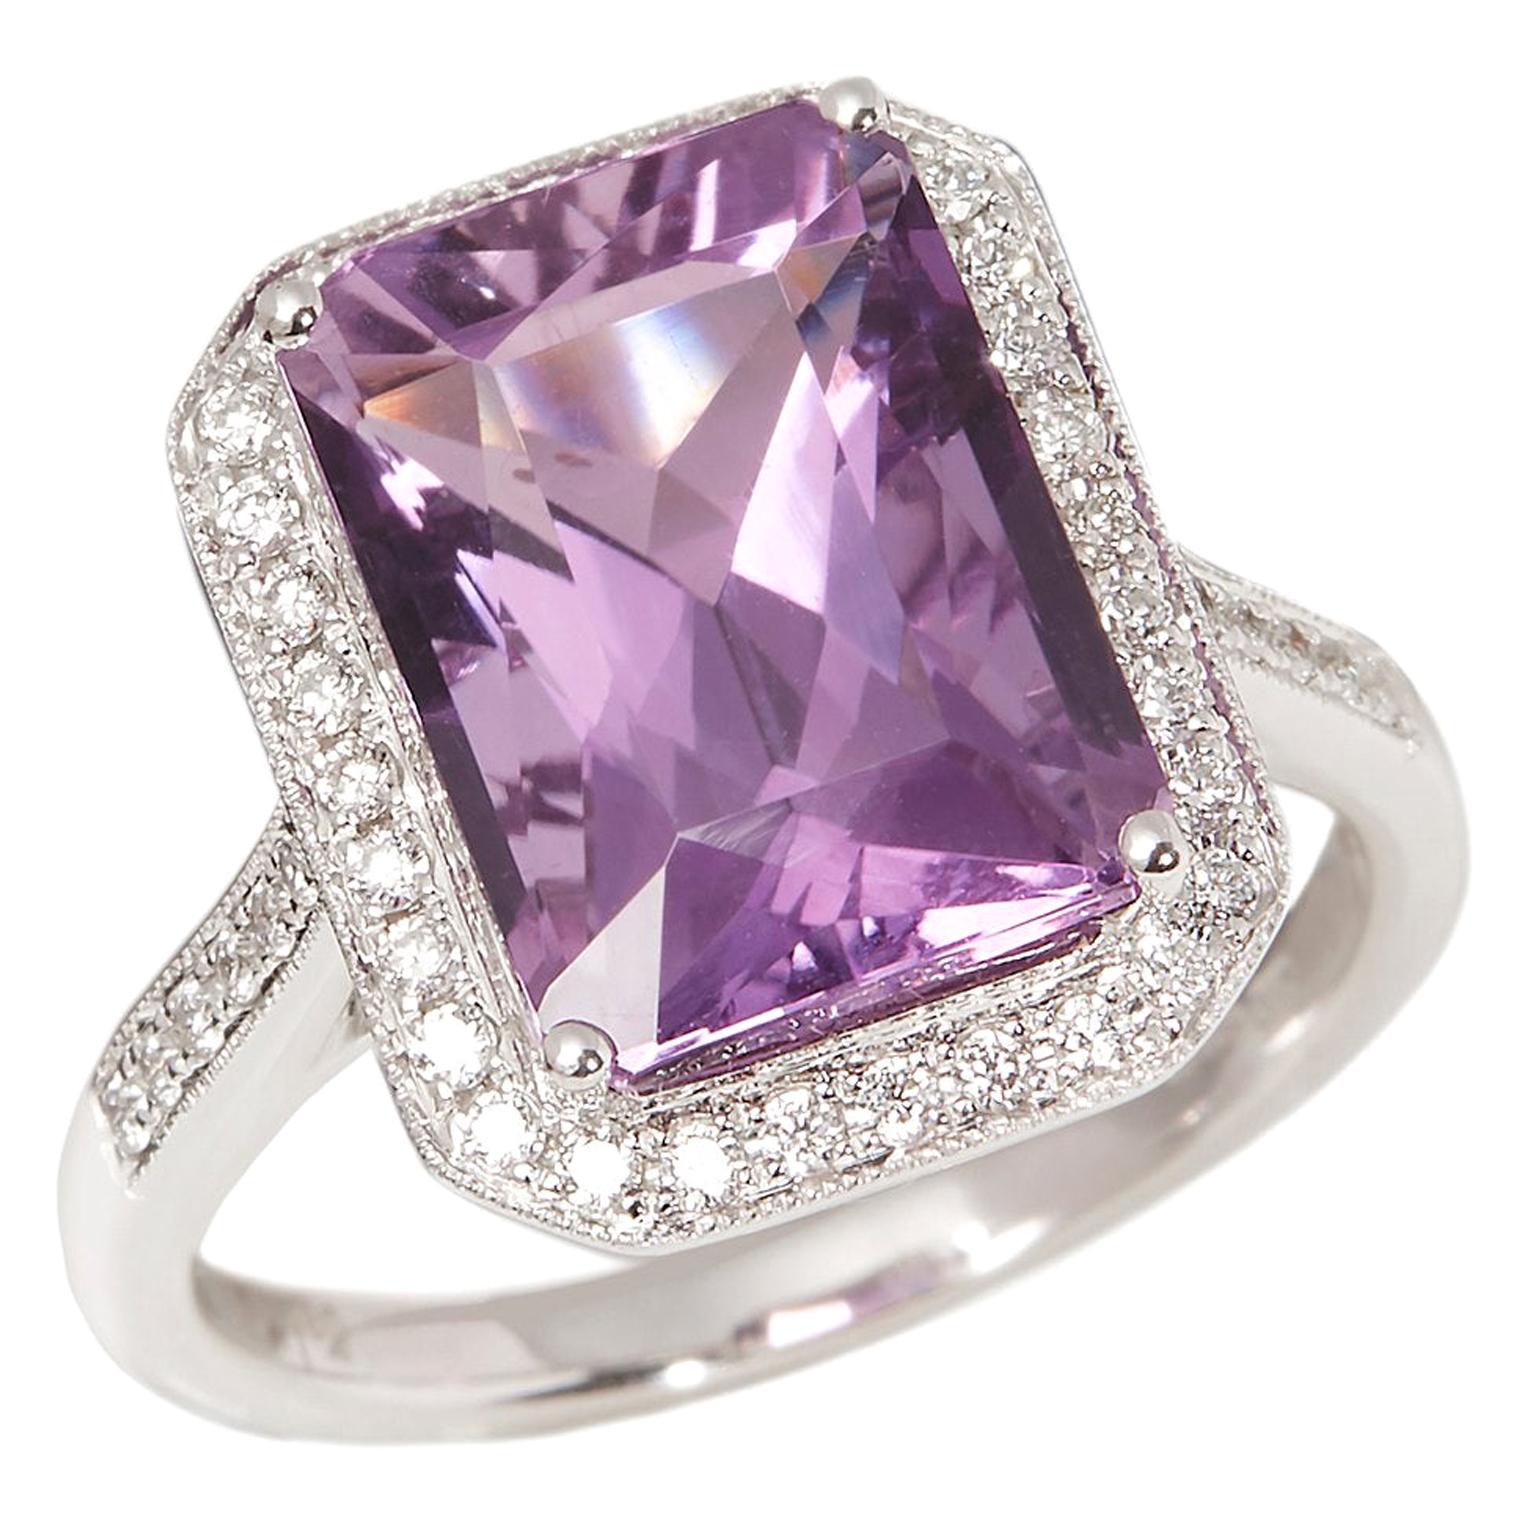 This ring designed by David Jerome is from his private collection and features one Emerald cut Amethyst totalling 6.32cts sourced in Brazil. Set with round brilliant cut Diamonds totalling 0.36cts mounted in an 18k white gold setting. Finger size UK